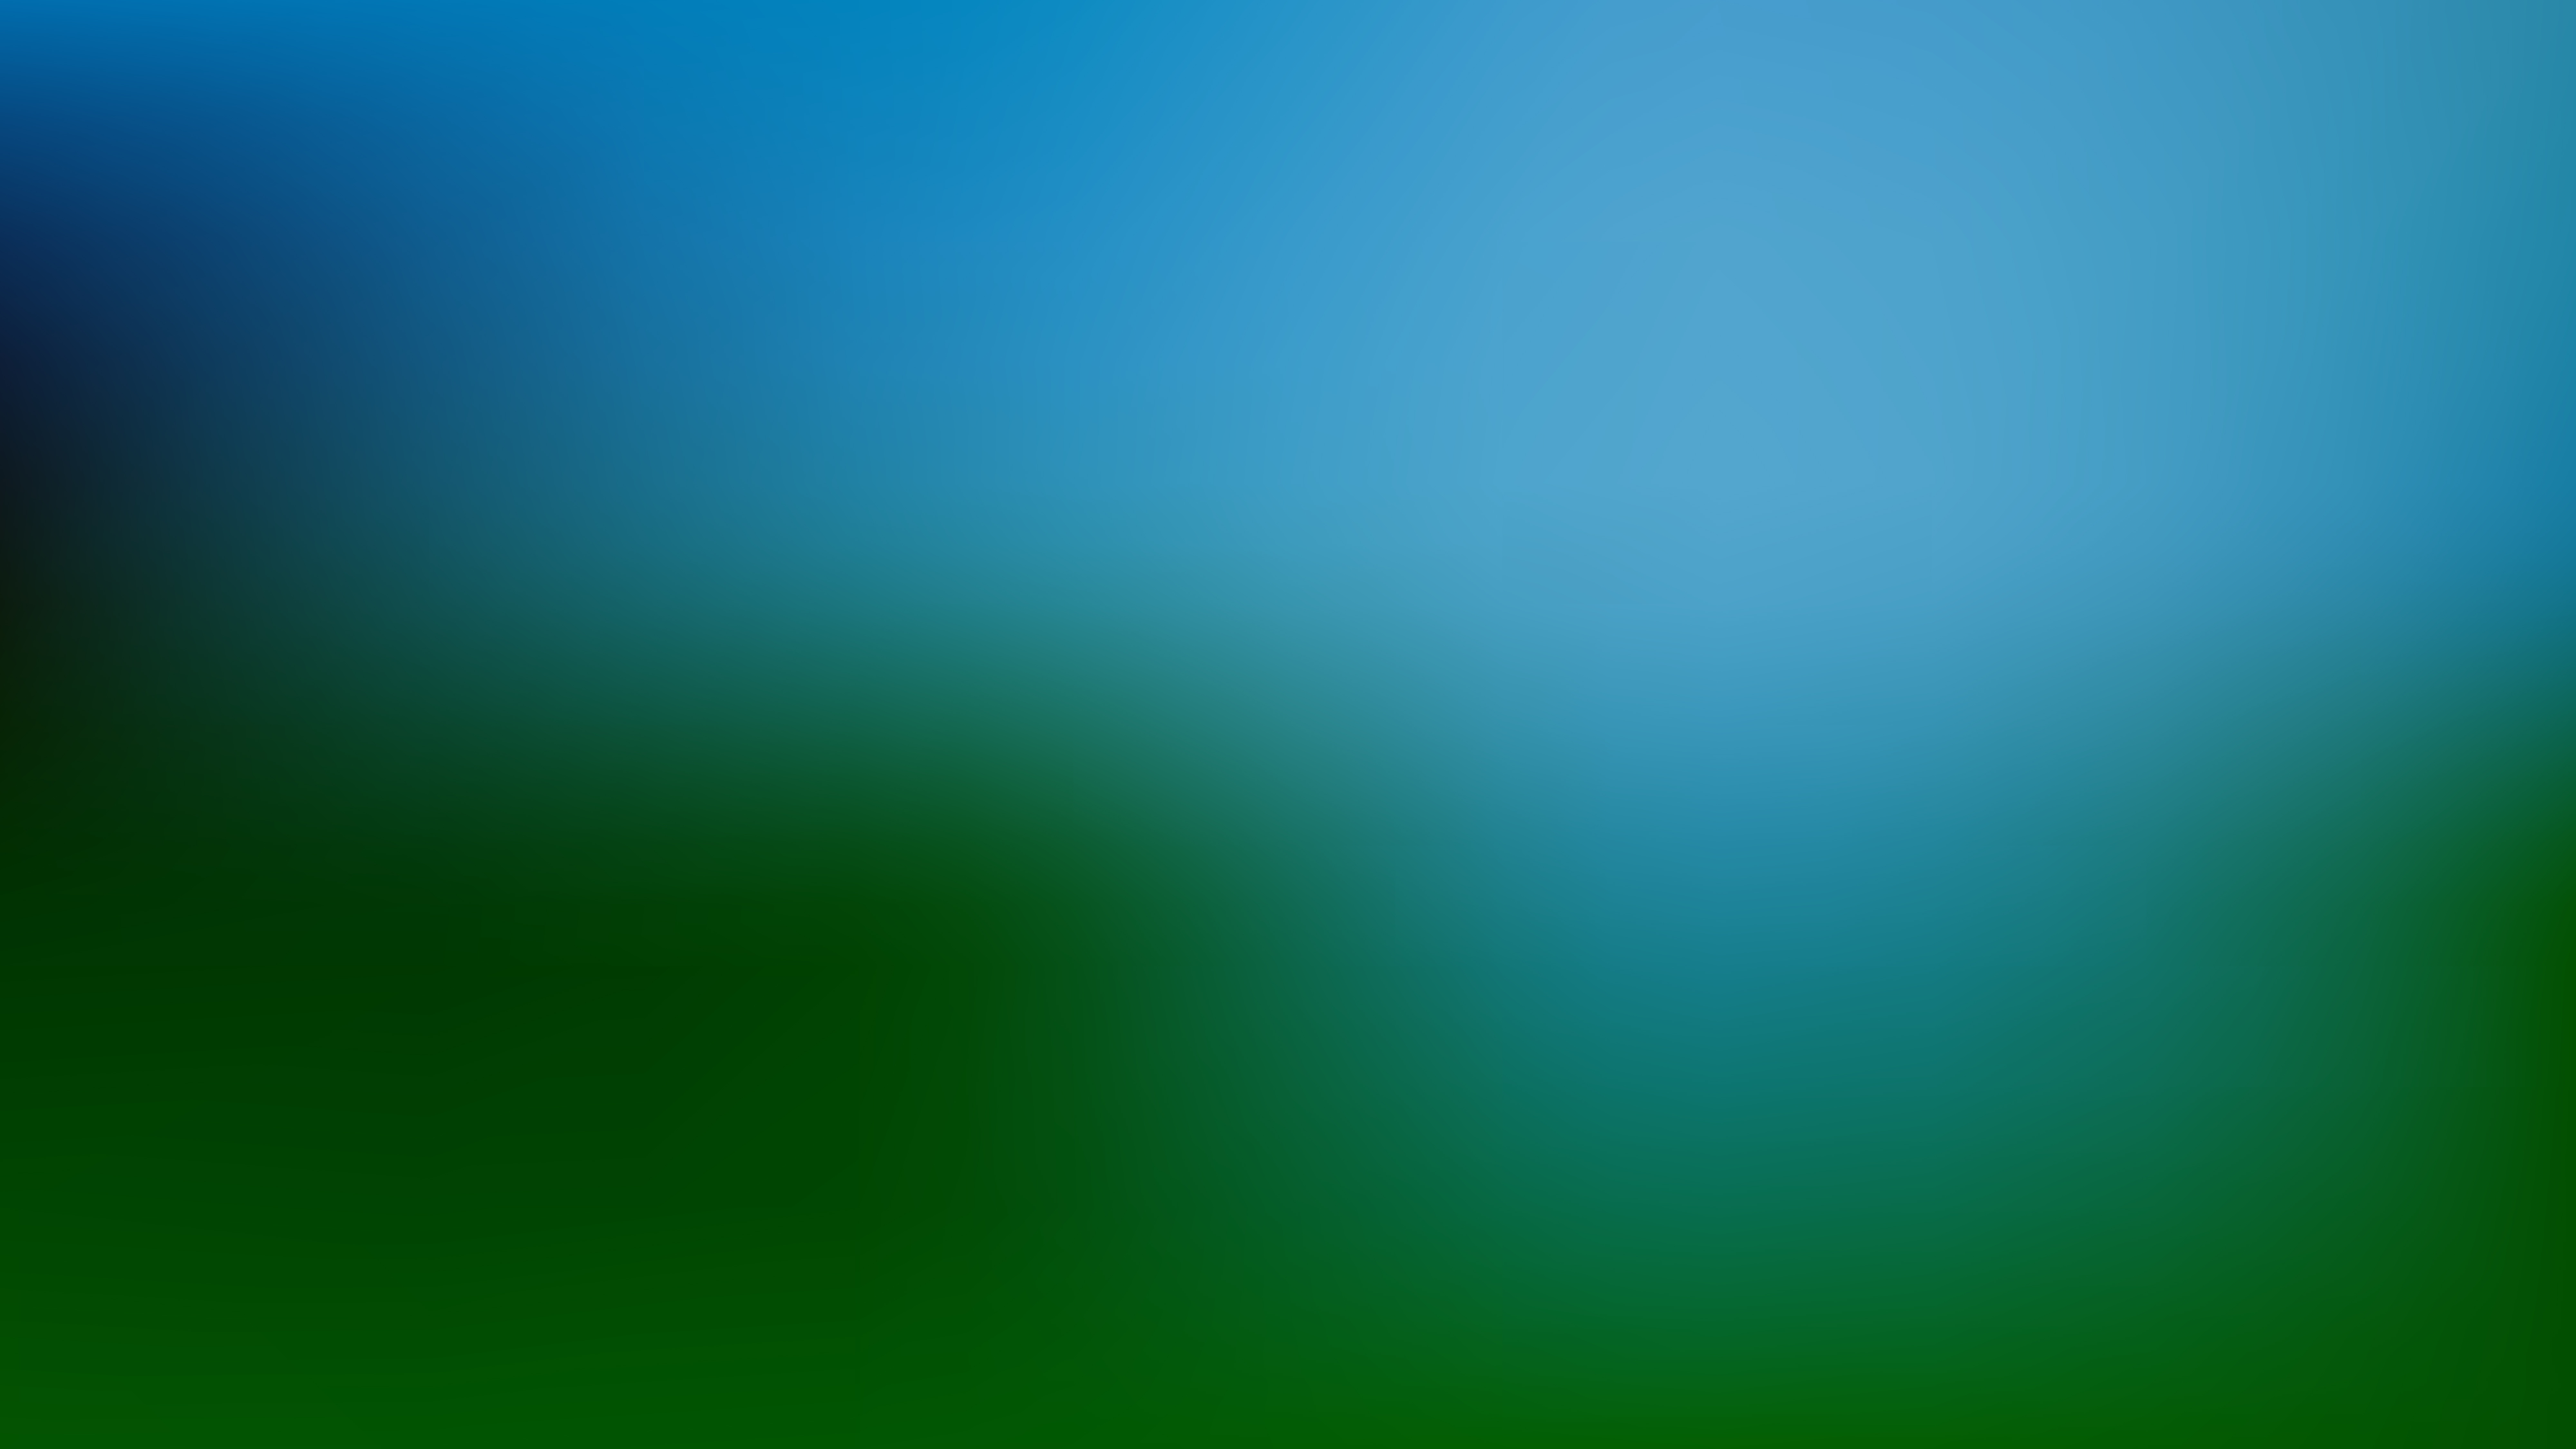 Free Blue and Green Blur Photo Wallpaper